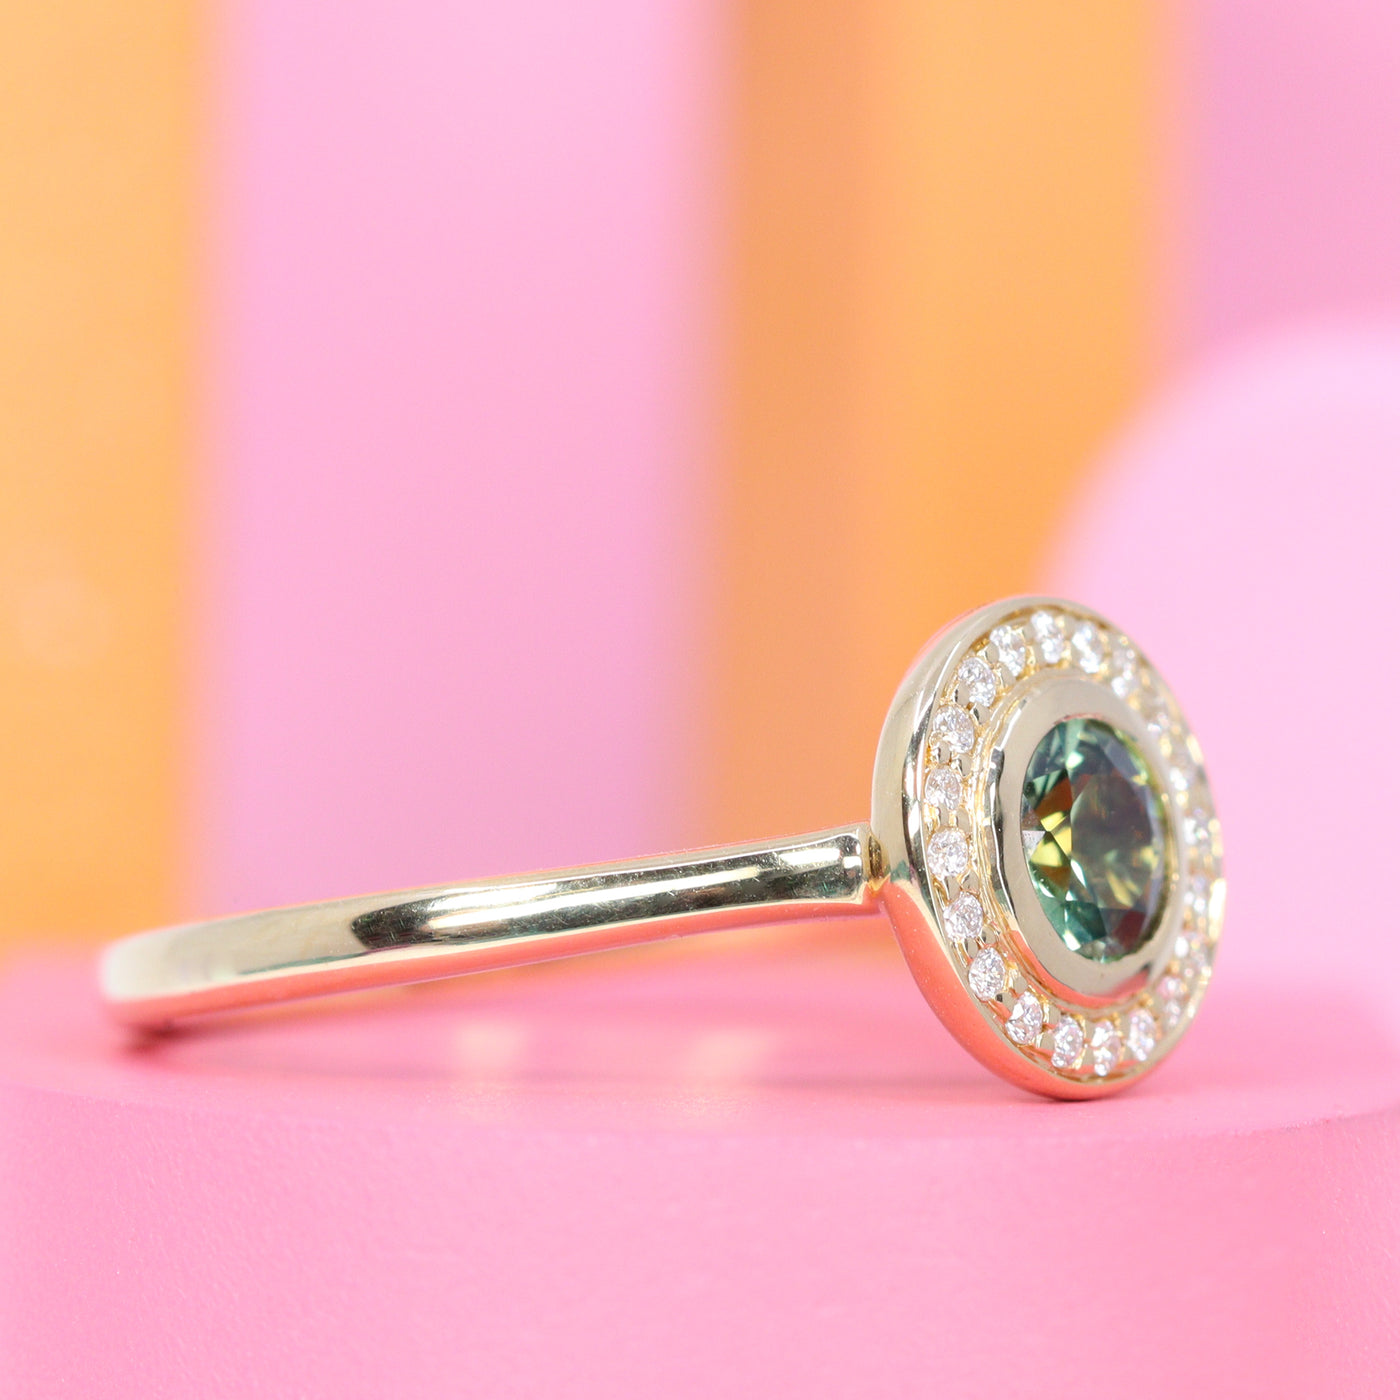 Florence - Green Sapphire and Diamond Halo Engagement Ring - Custom Made-to-Order Design